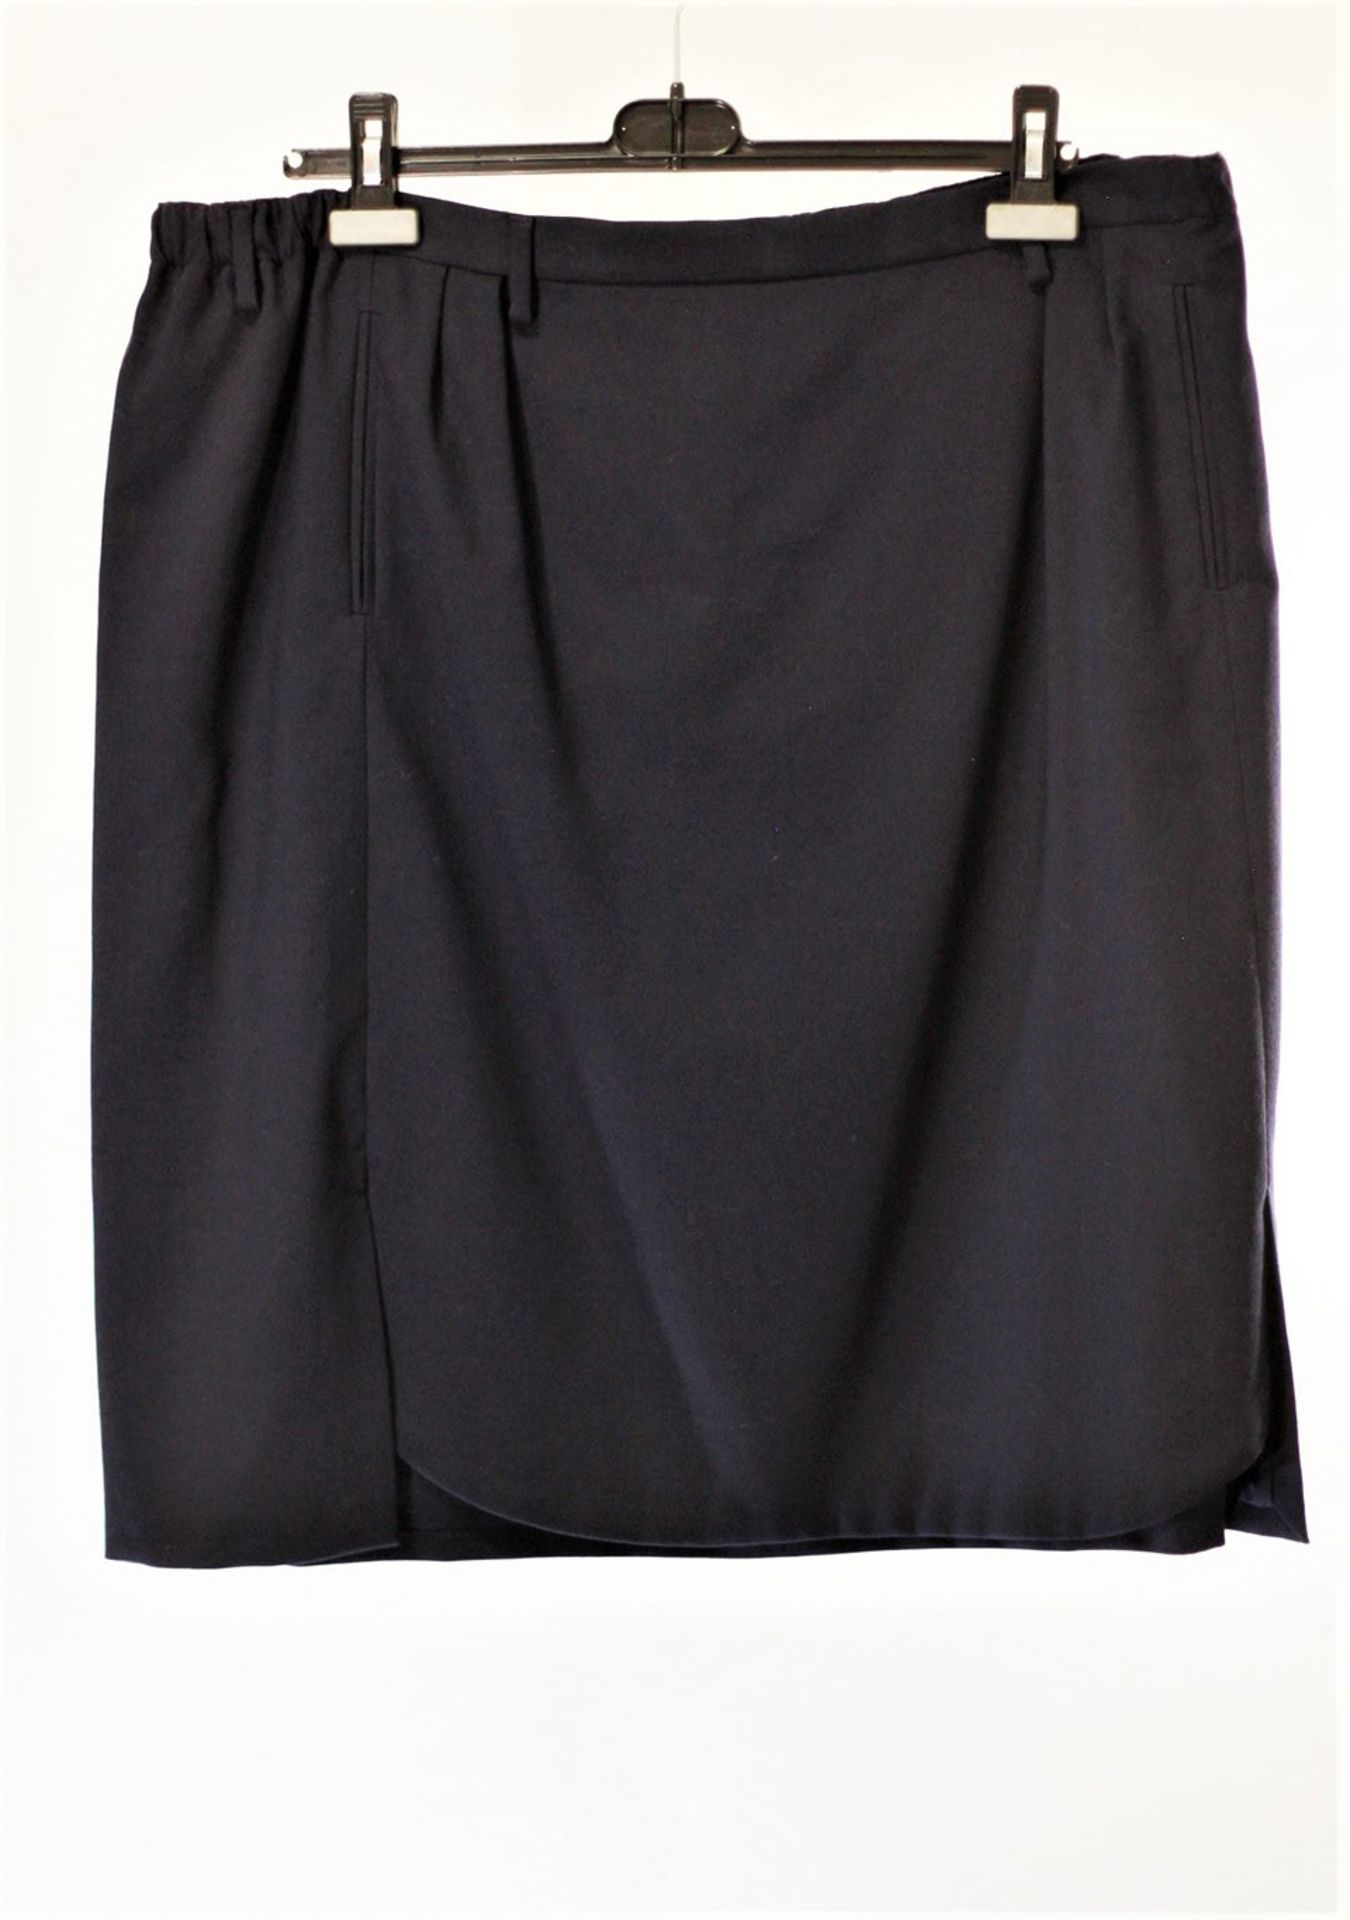 1 x Agnona Navy Skirt - Size: 24 - Material: 97% Cotton, 2% Nylon, 1% Elastane - From a High End - Image 2 of 5